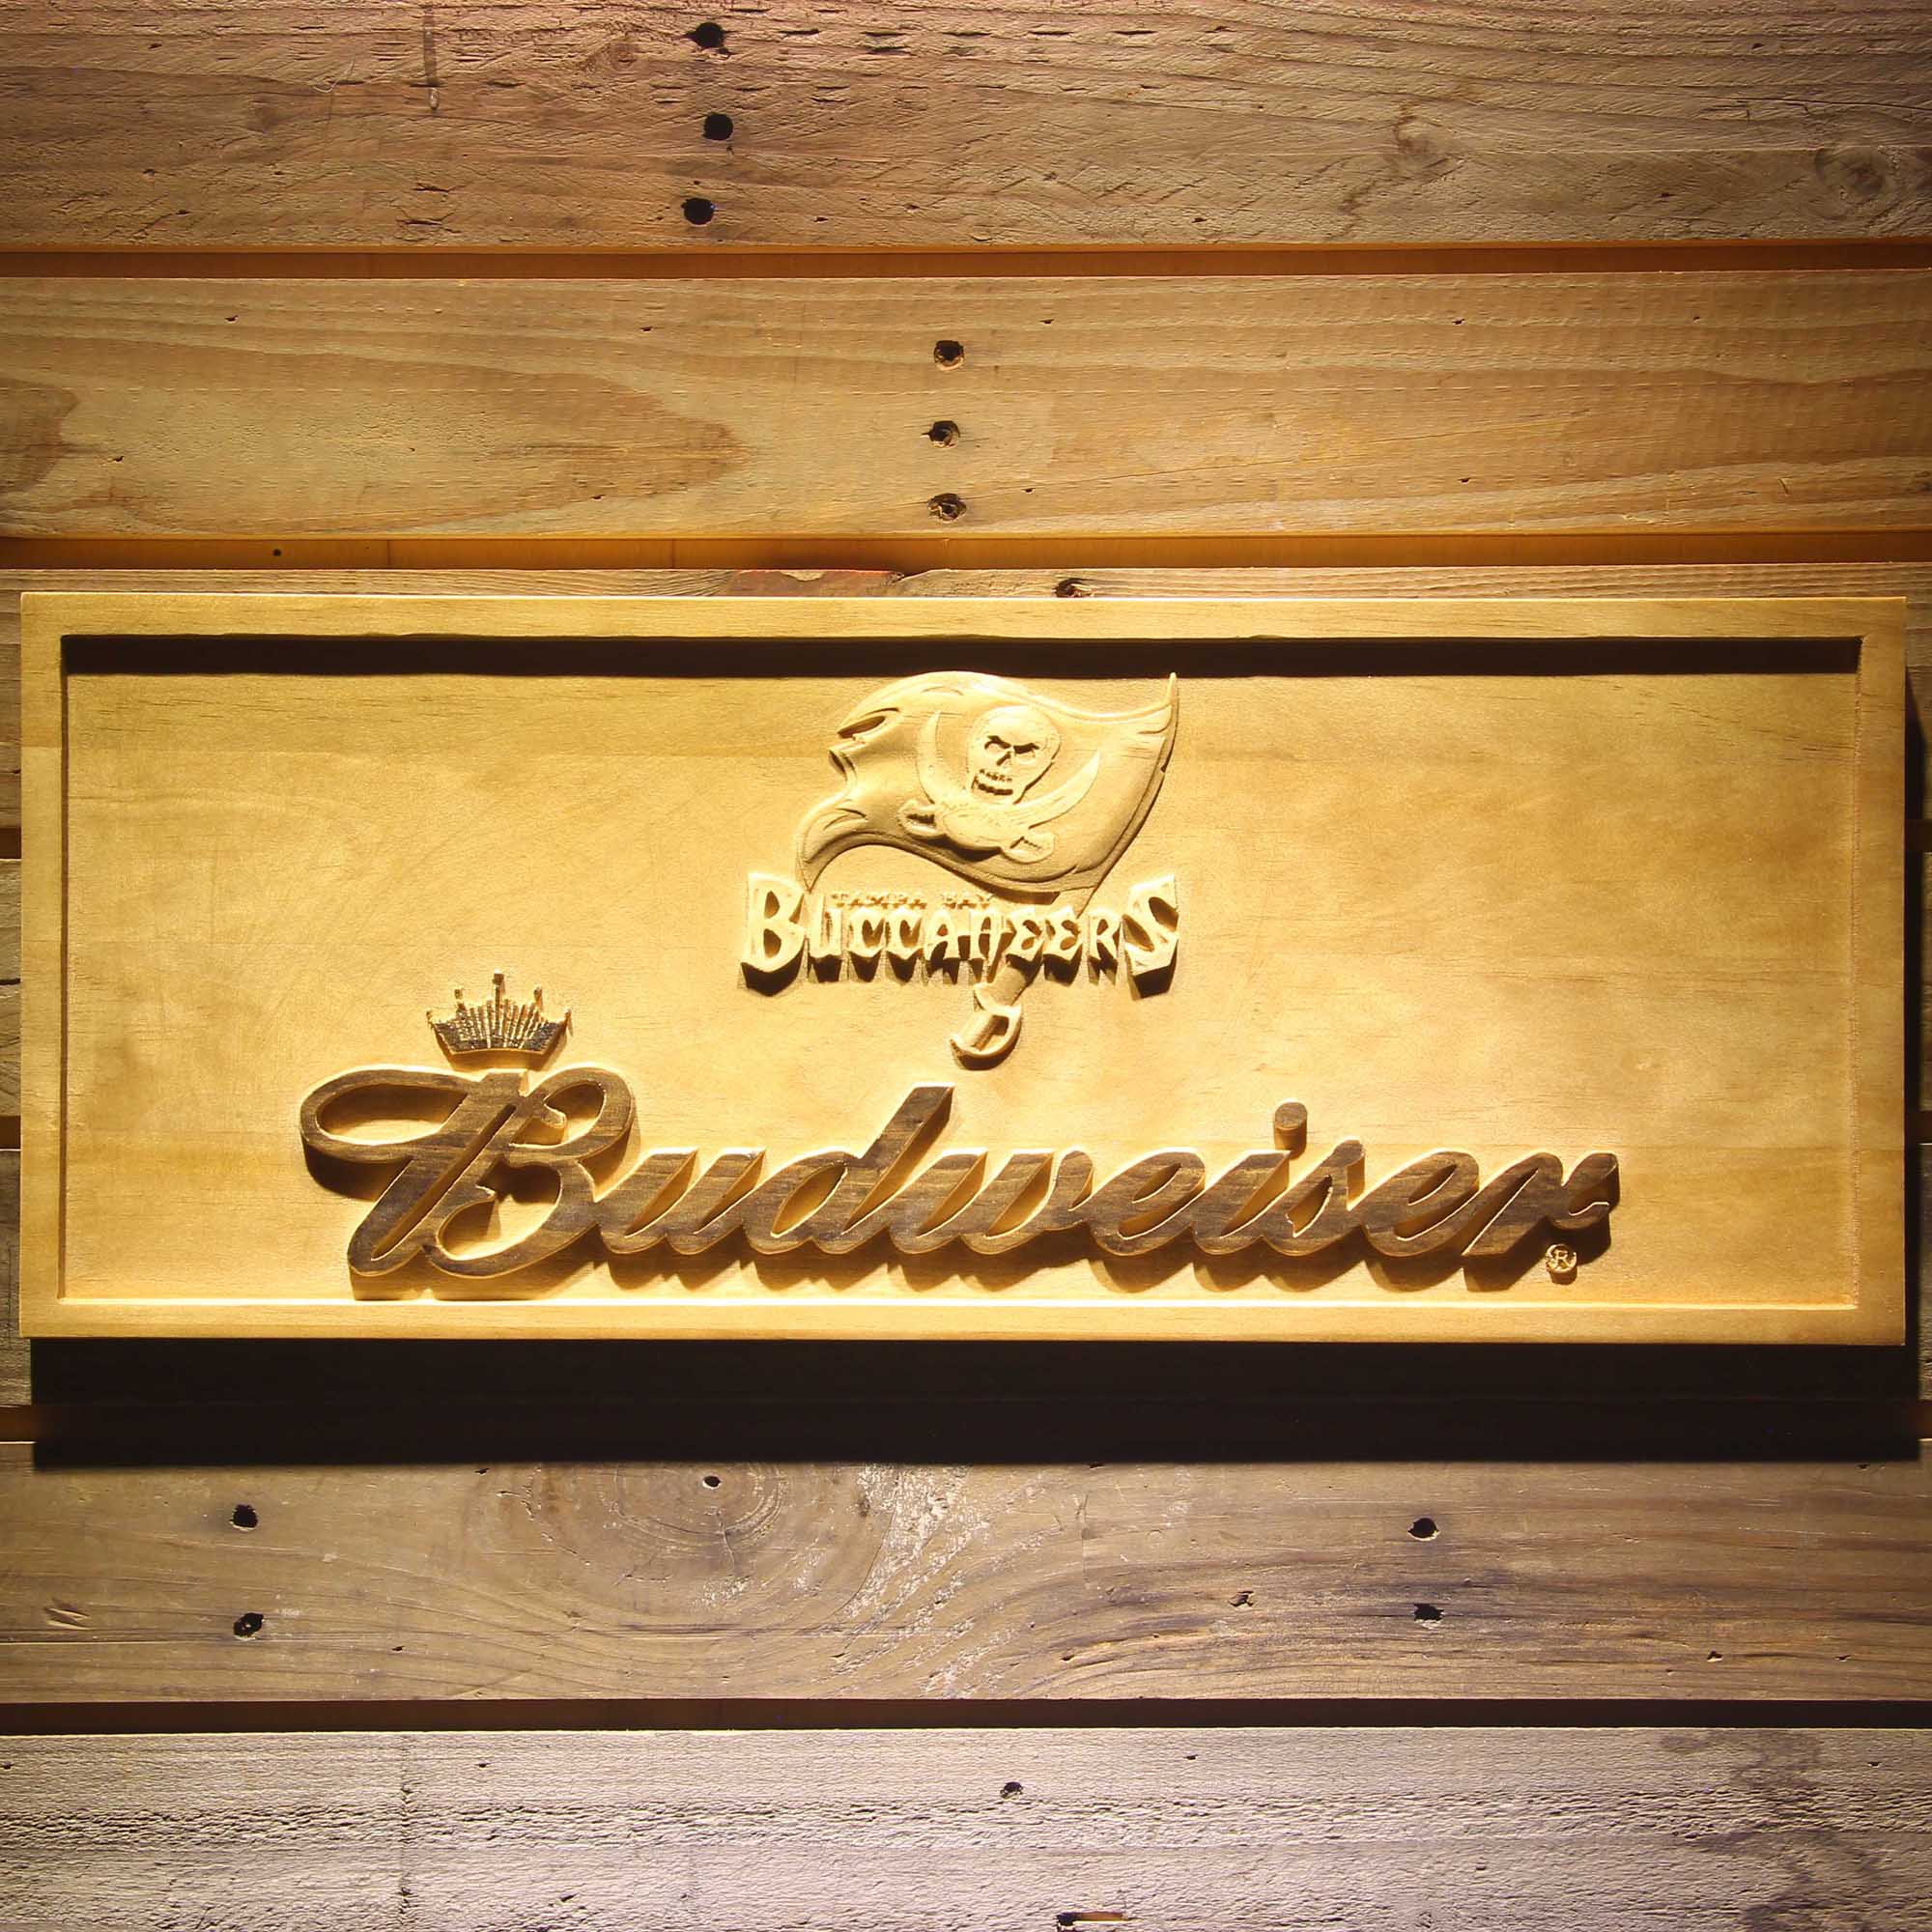 Tampa Bay Buccaneers Budweiser 3D Wooden Engrave Sign